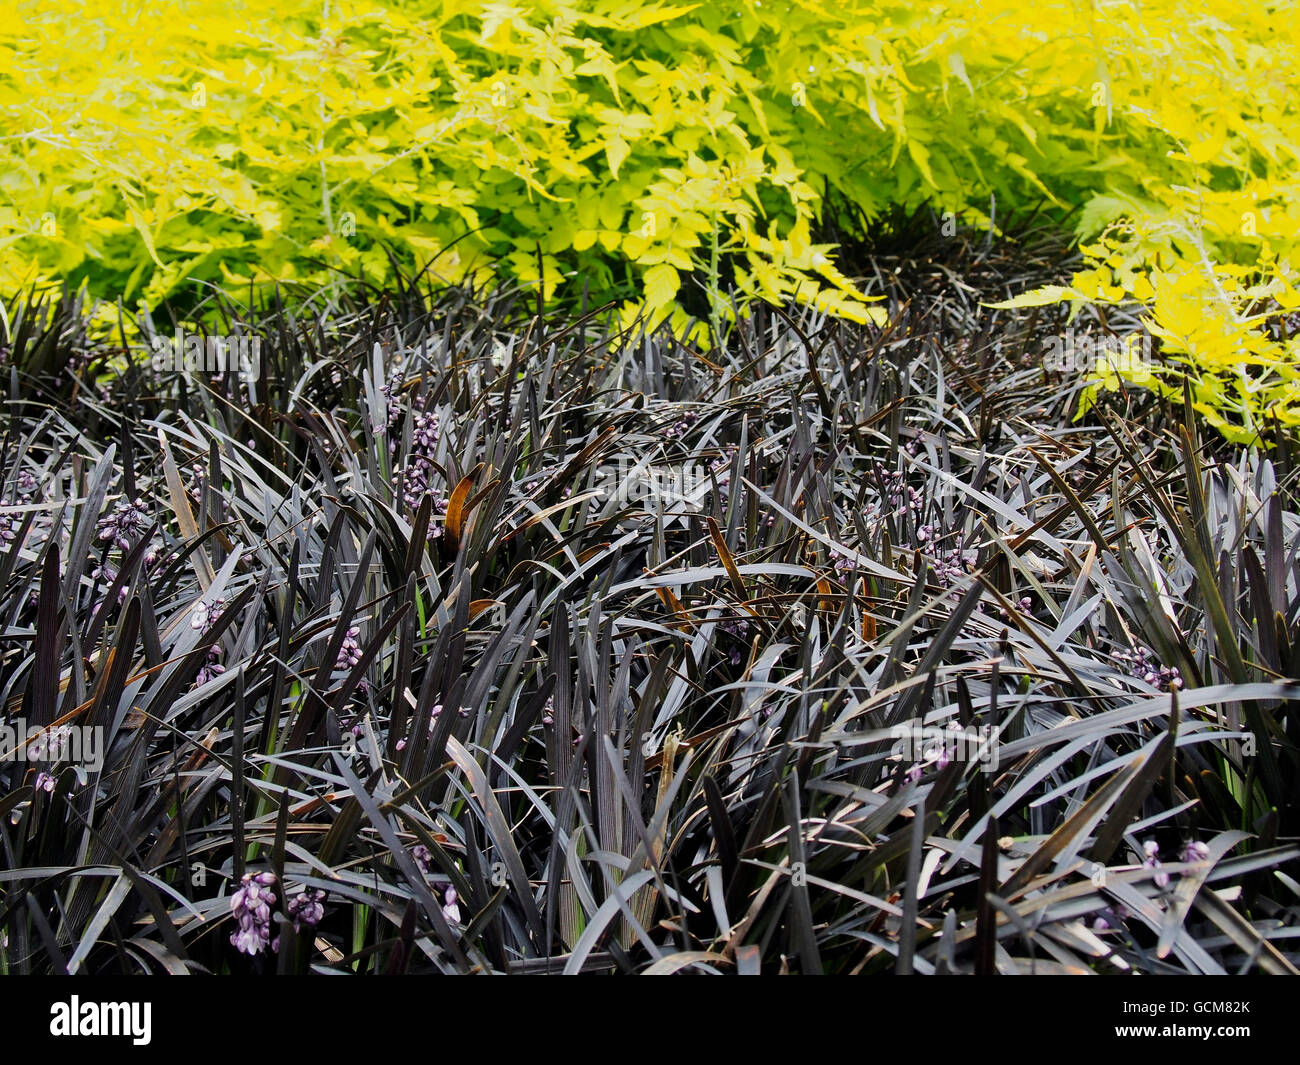 Ophiopogon Planiscapis 'Nigrescens'  is a mondo grass cultivar which is noted for its purplish-black leaves. Stock Photo